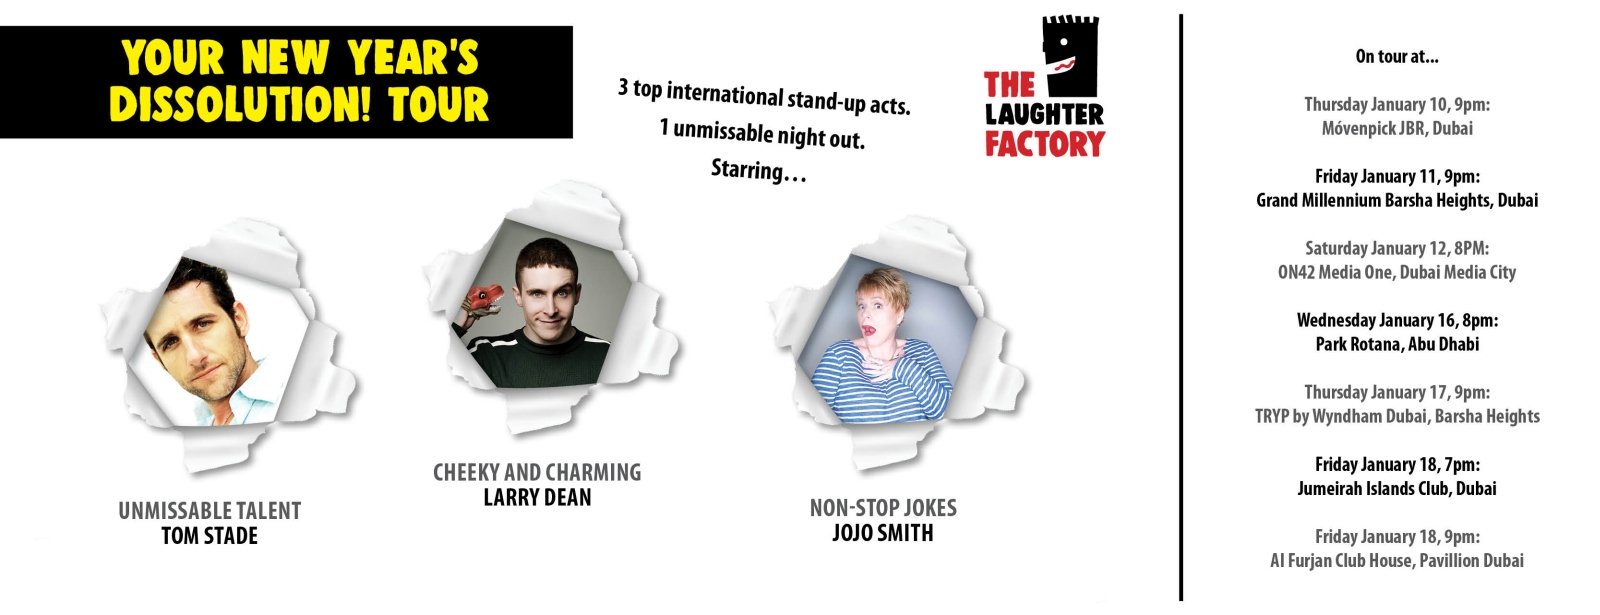 The Laughter Factory: Your New Year’s Dissolution! Tour - Coming Soon in UAE